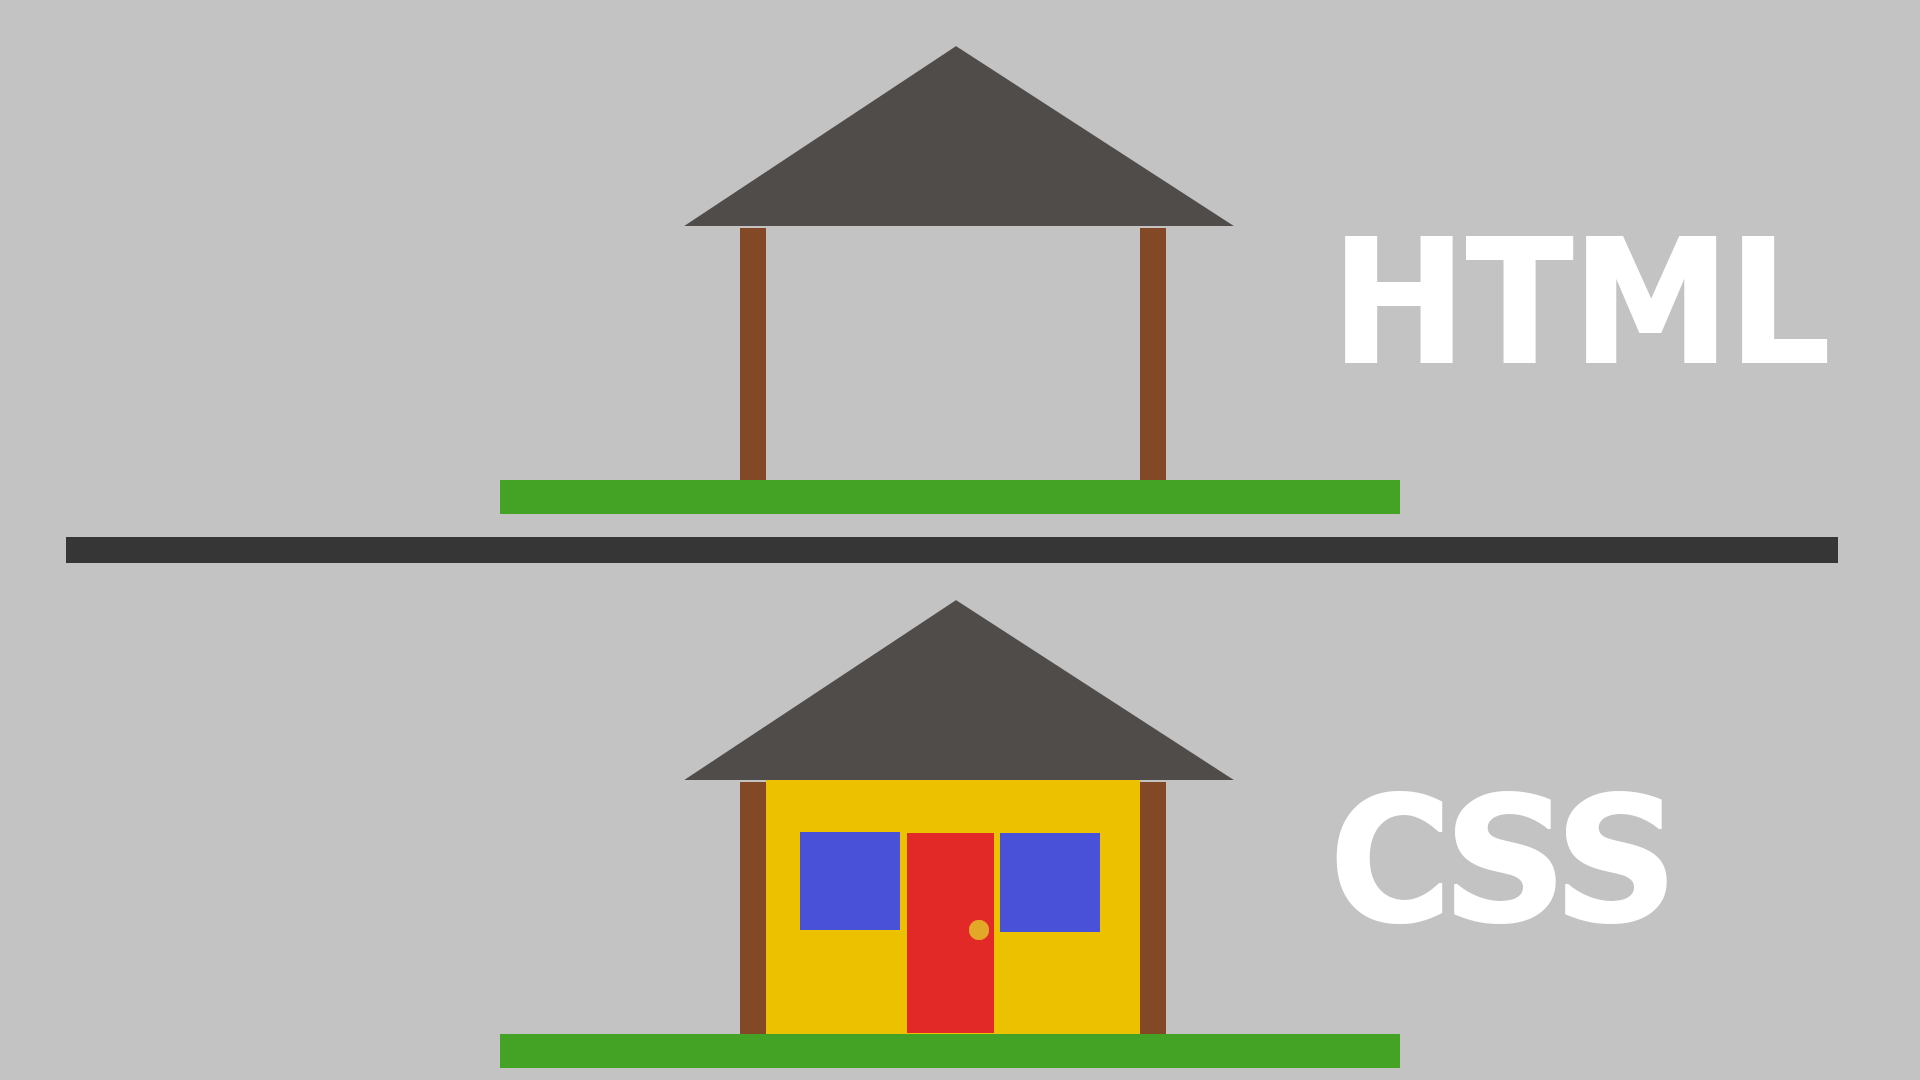 An image comparing HTML and CSS